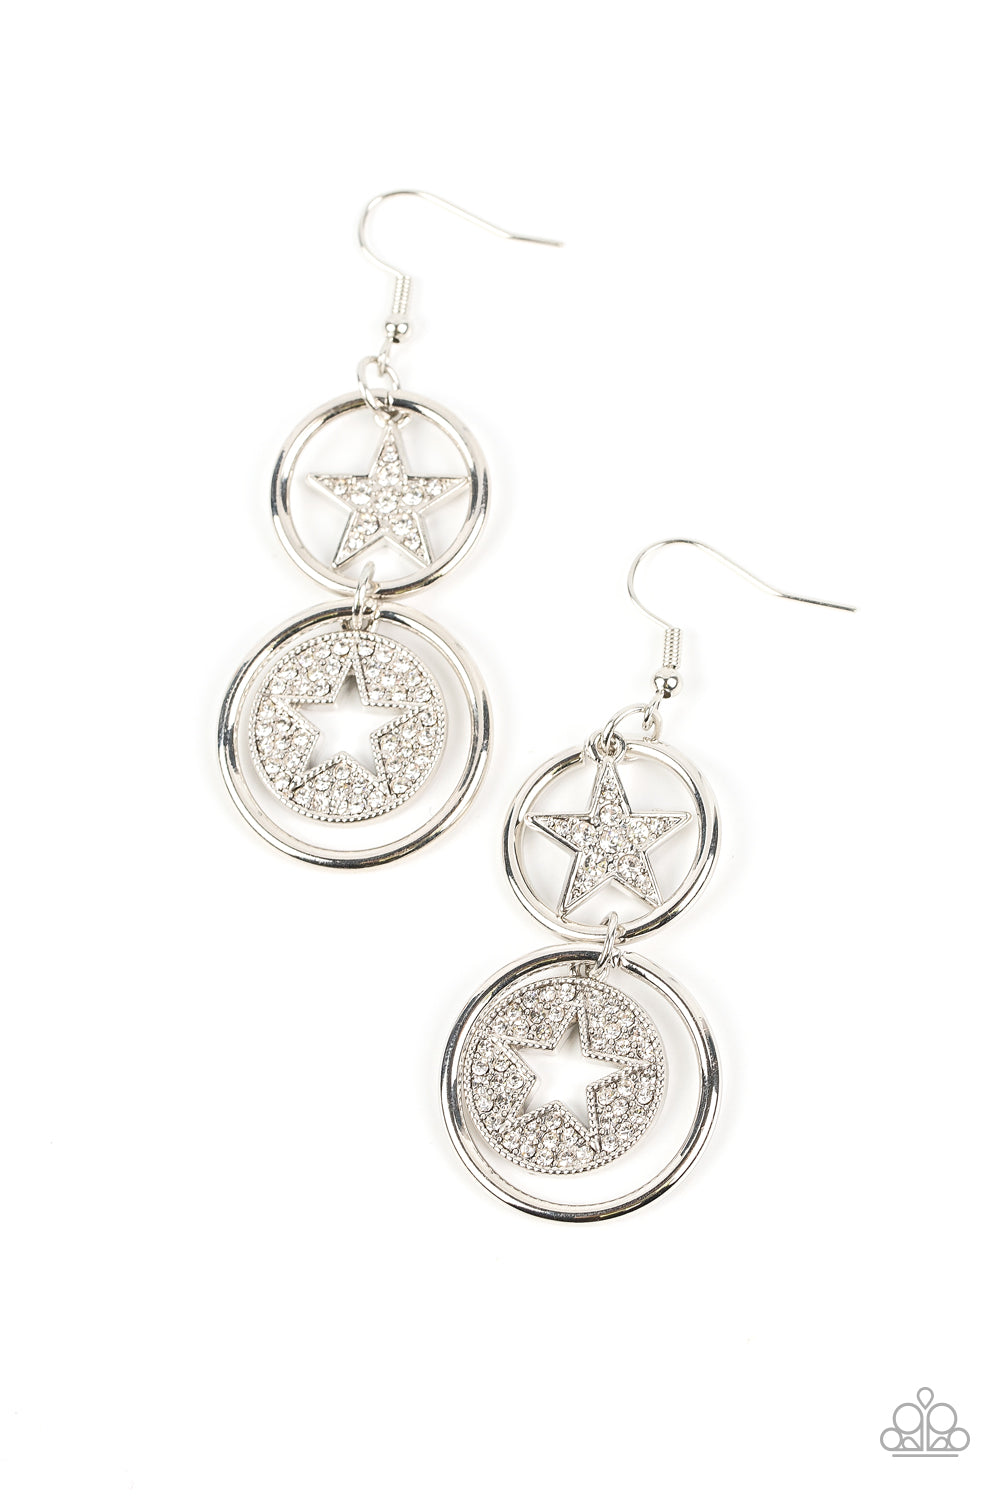 Paparazzi Liberty and SPARKLE for All - White Earrings - A Finishing Touch Jewelry